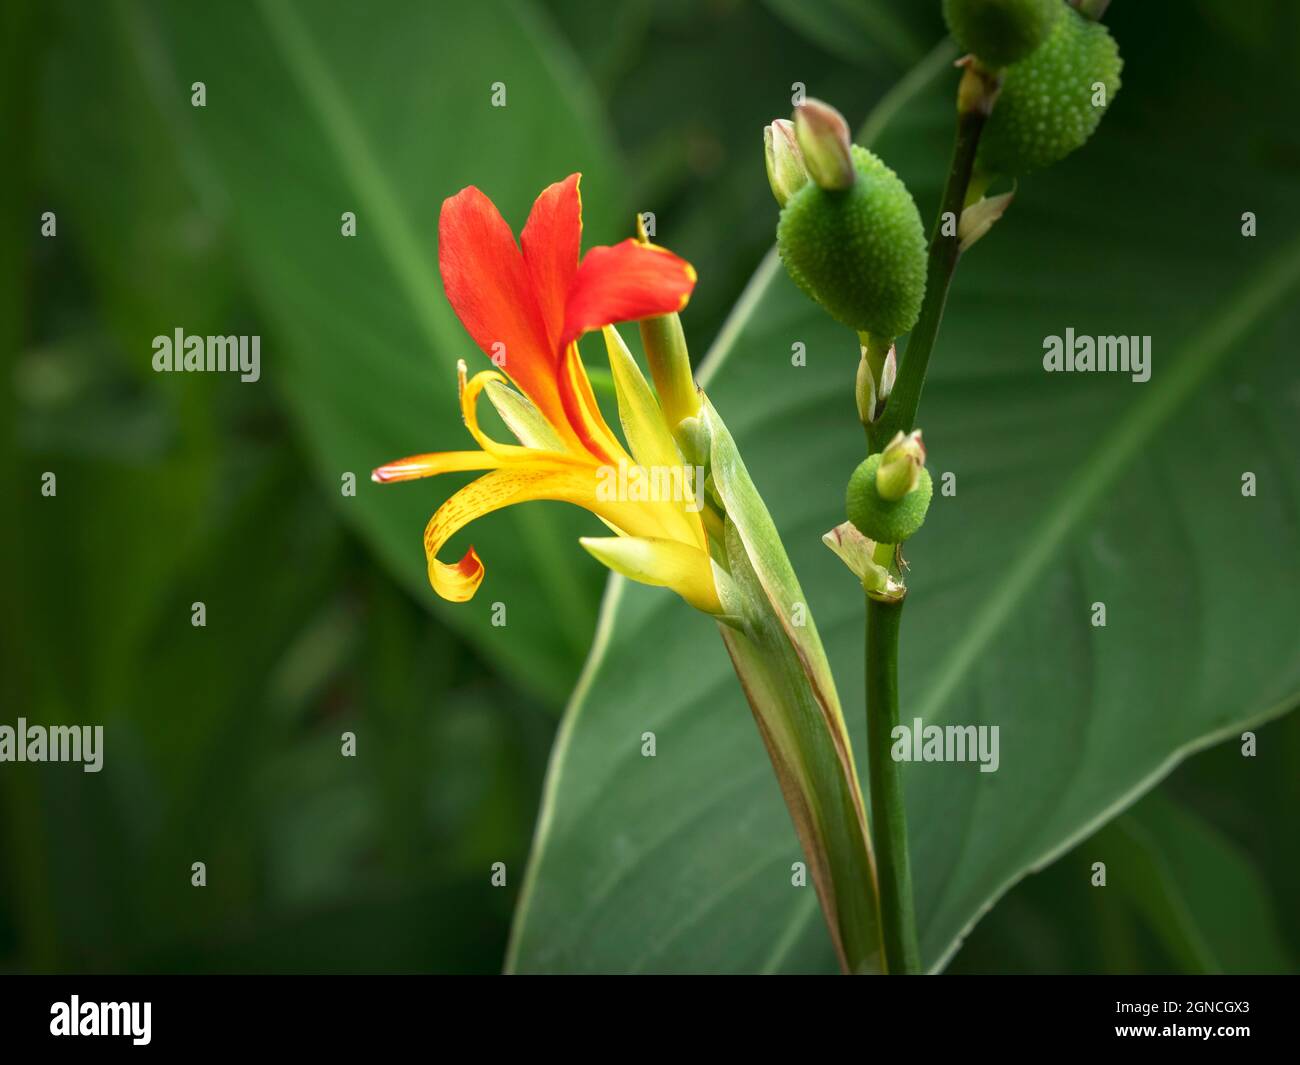 Canna lily flower, fruits and green leaves Stock Photo